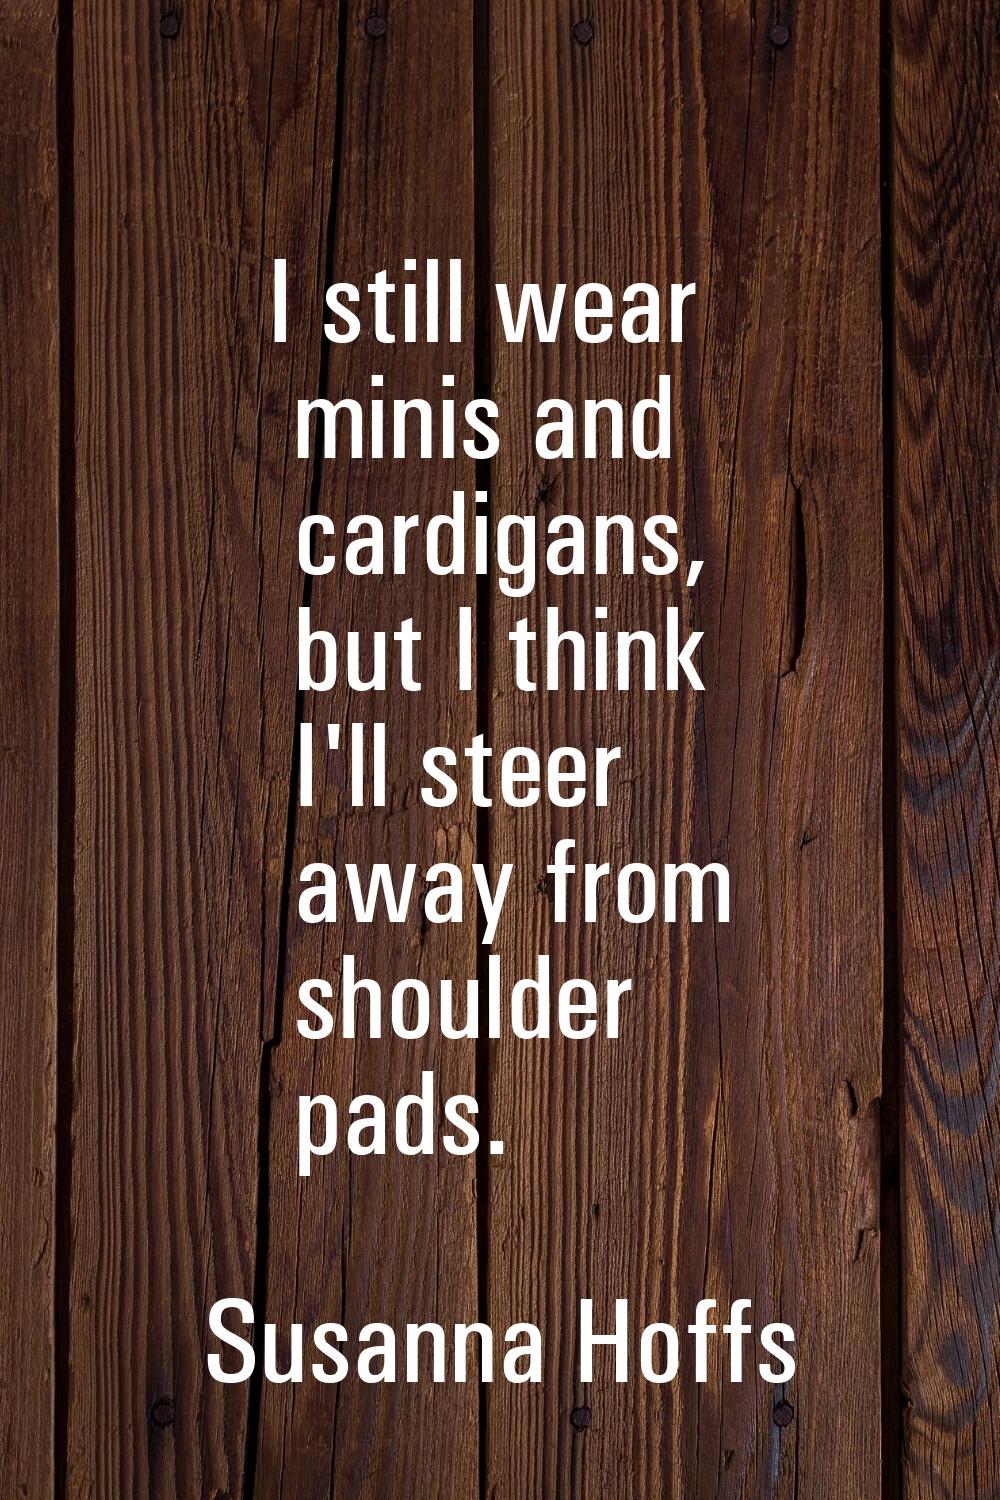 I still wear minis and cardigans, but I think I'll steer away from shoulder pads.